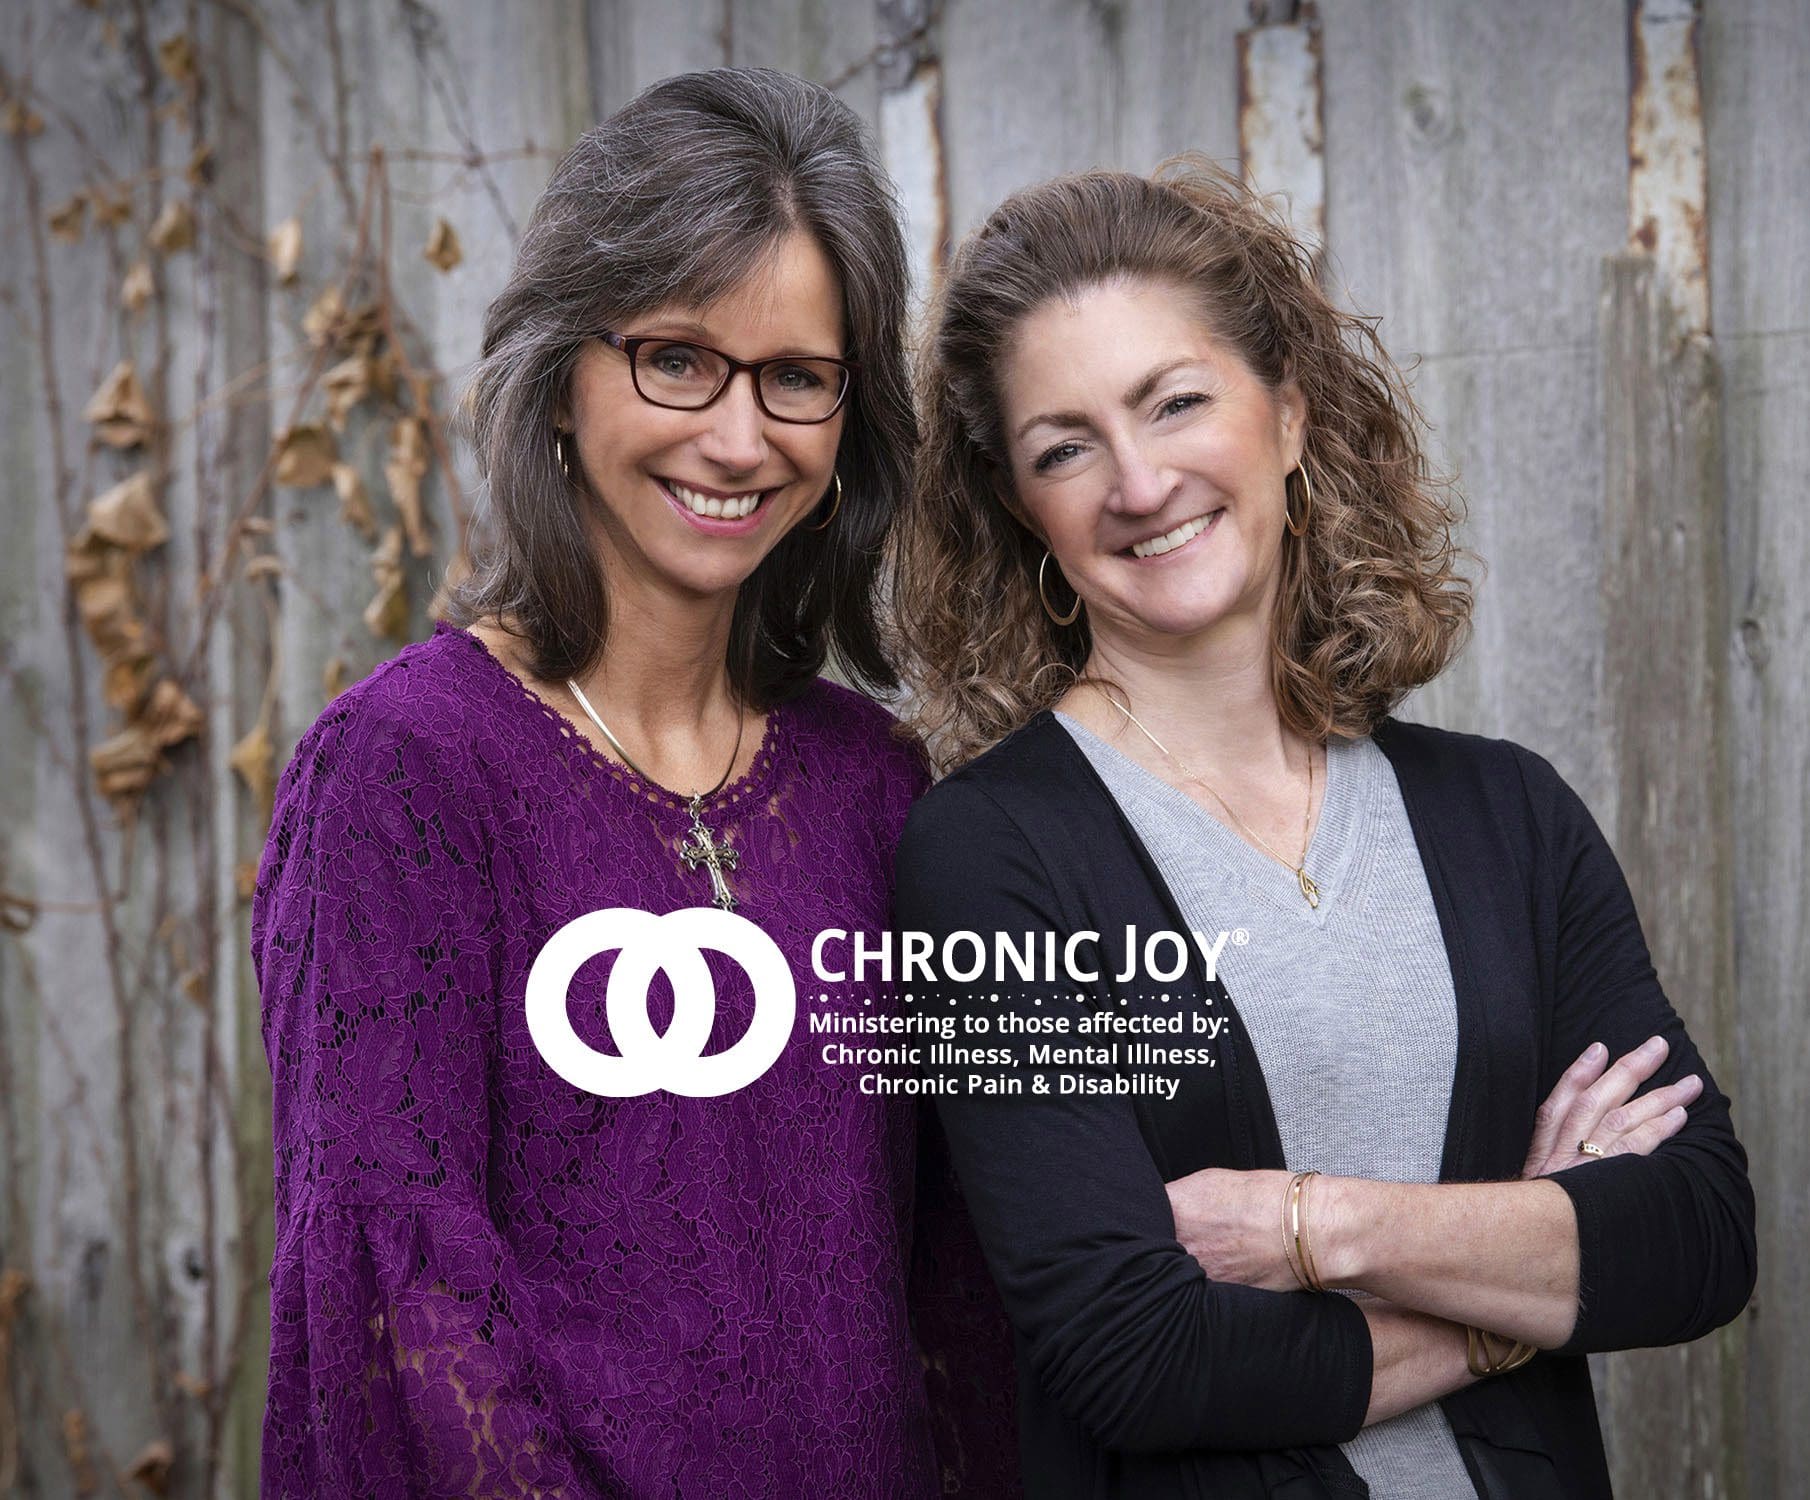 Chronic Joy® • Ministering to affected by Chronic Illness, Mental Illness, Chronic Pain & Disability